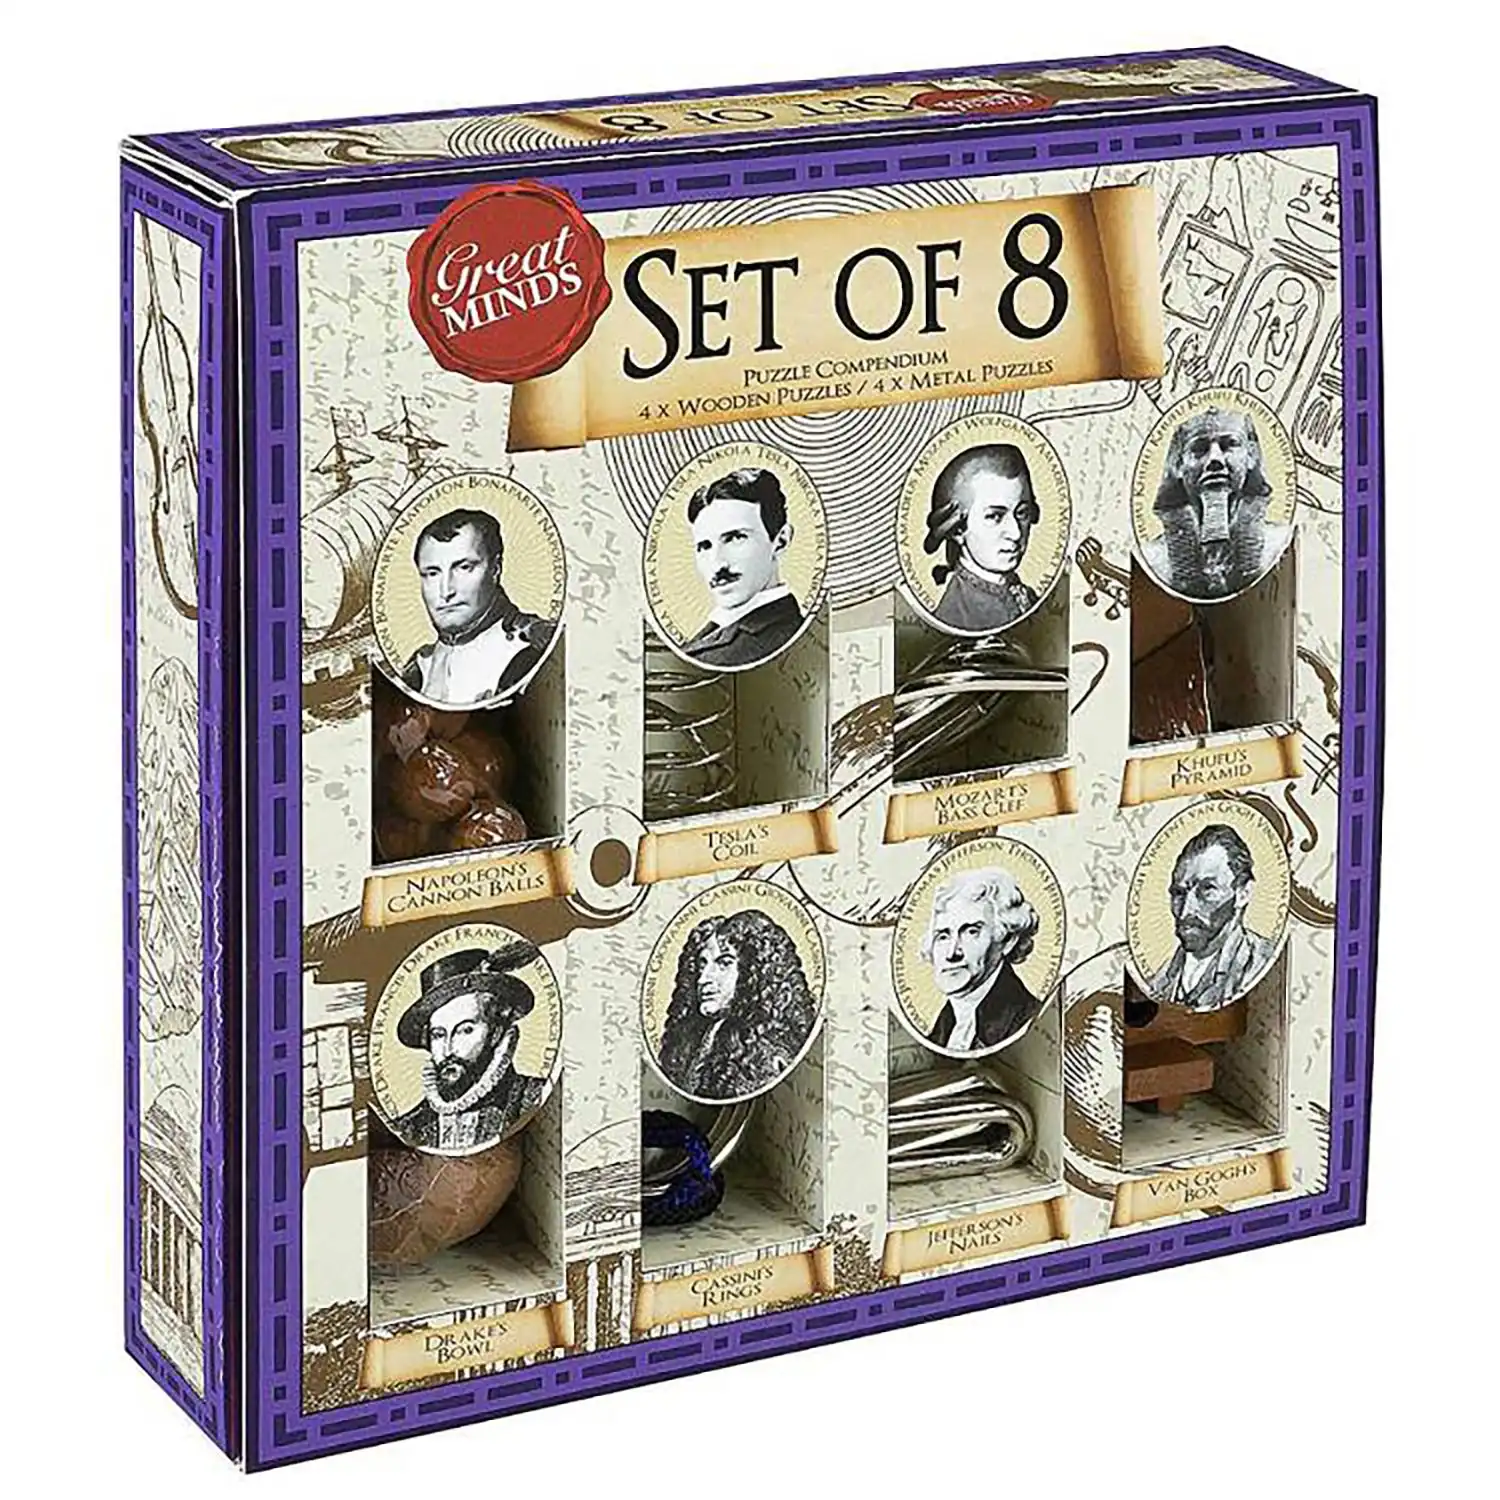 Great Minds - Set of 8